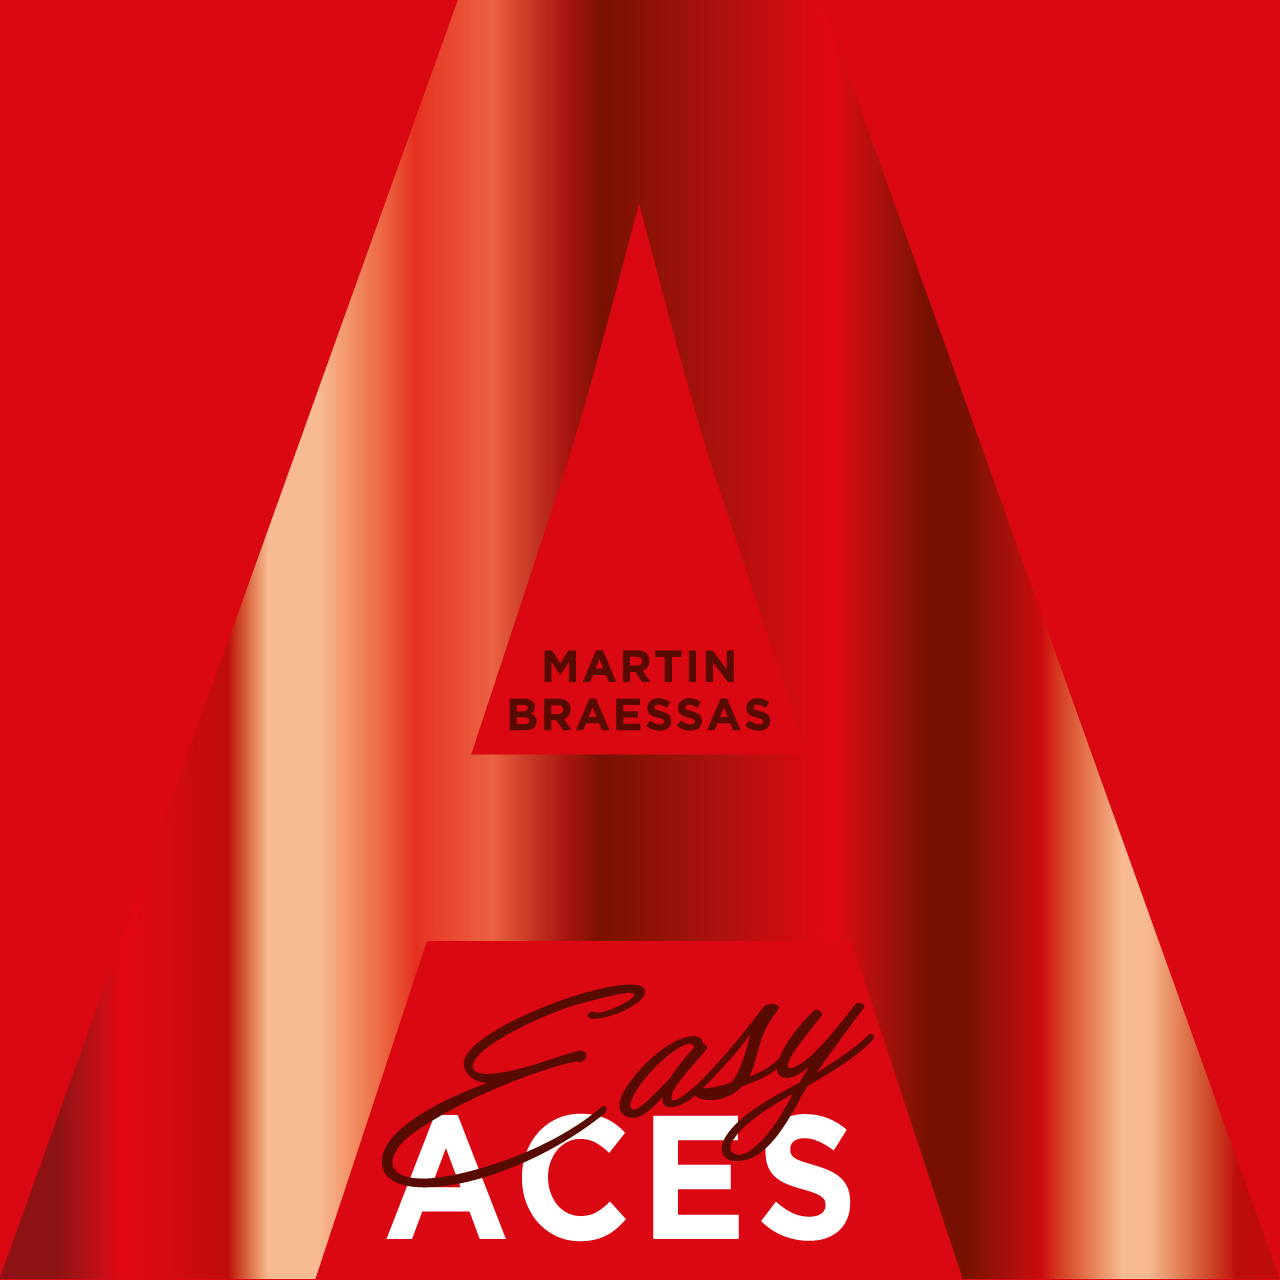 Easy Aces by Martin Braessas (Mp4 Video Download)